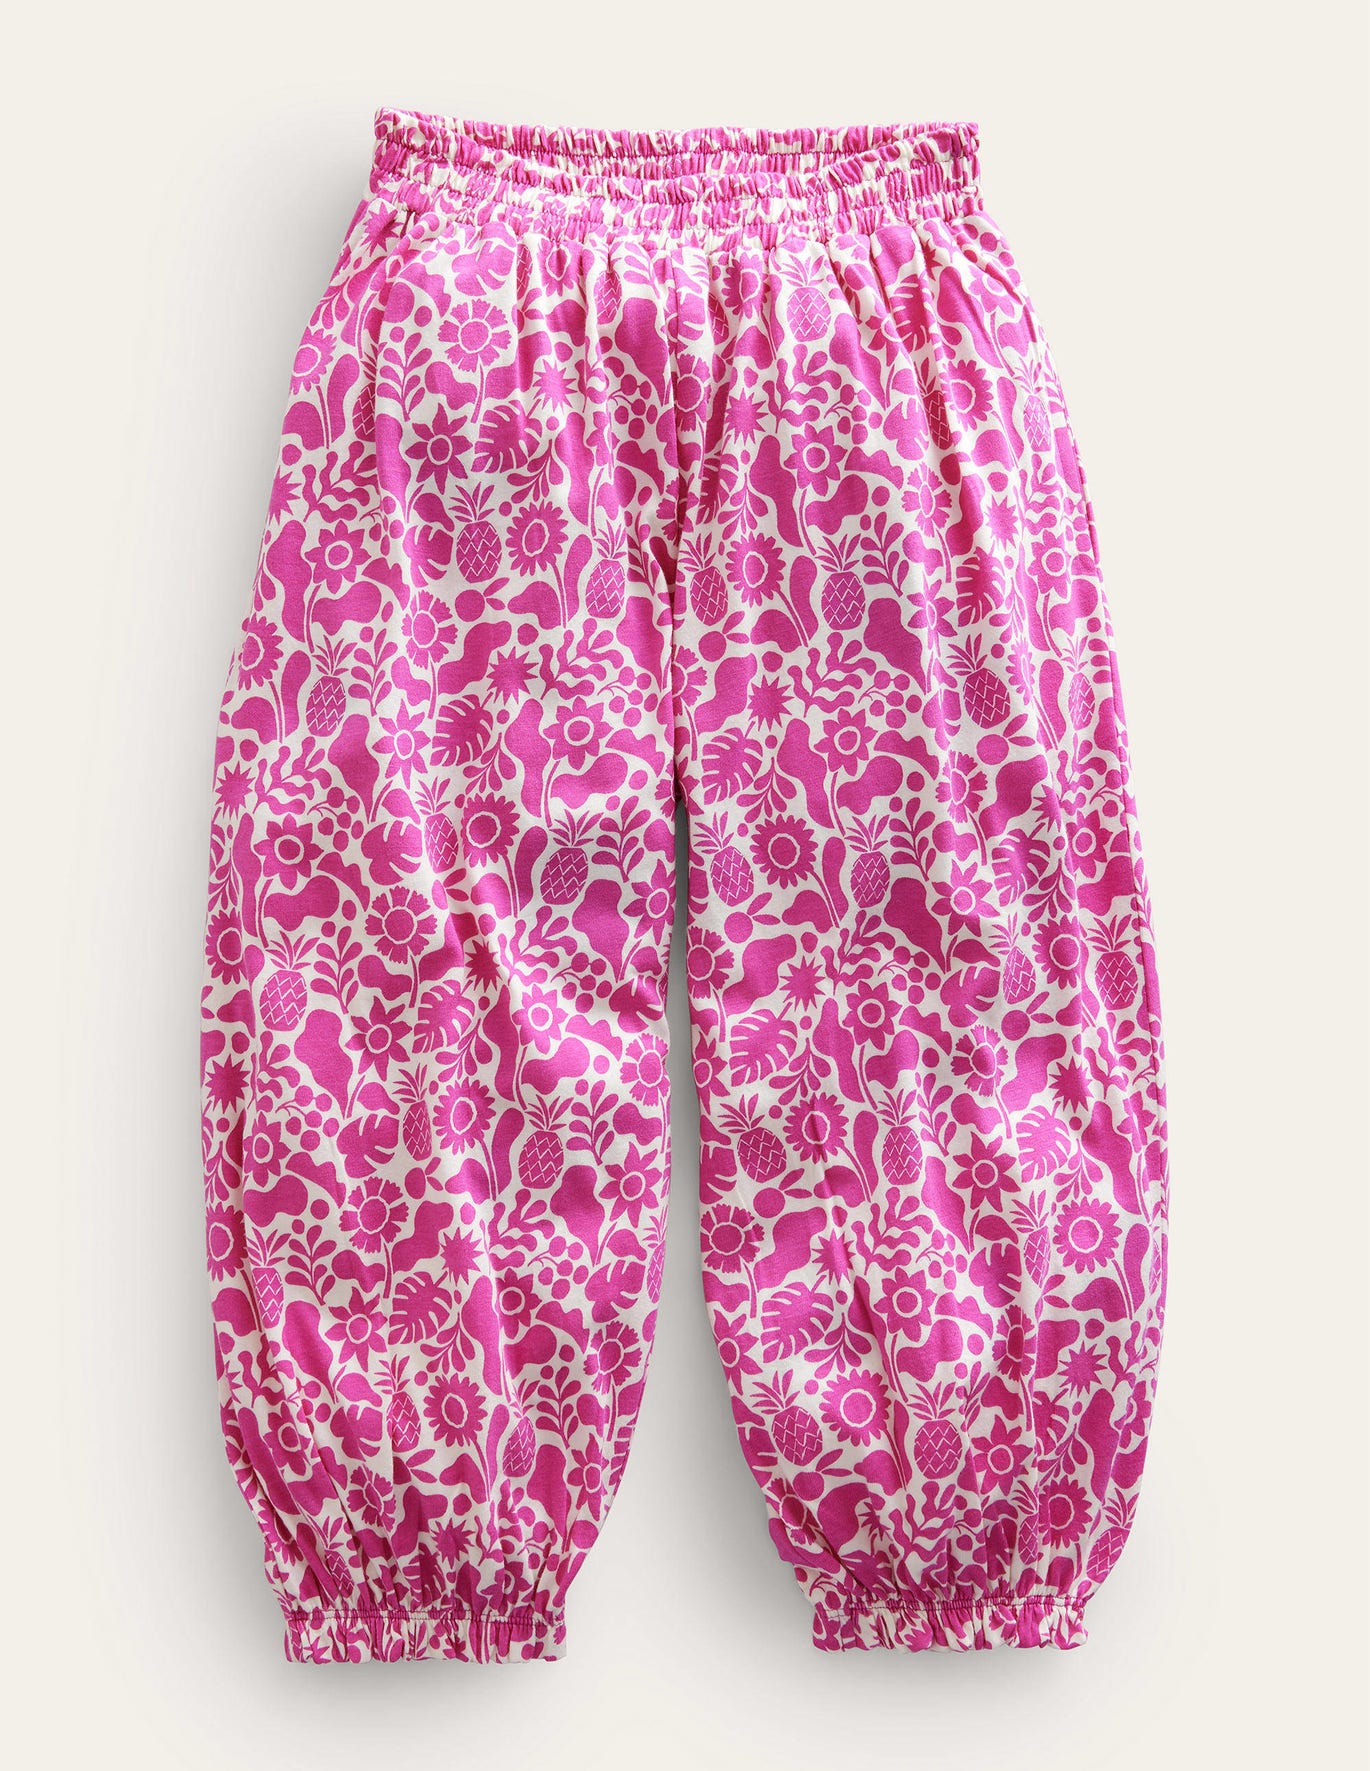 Boden Jersey Harem Pants - Amazing Pink Holiday Floral